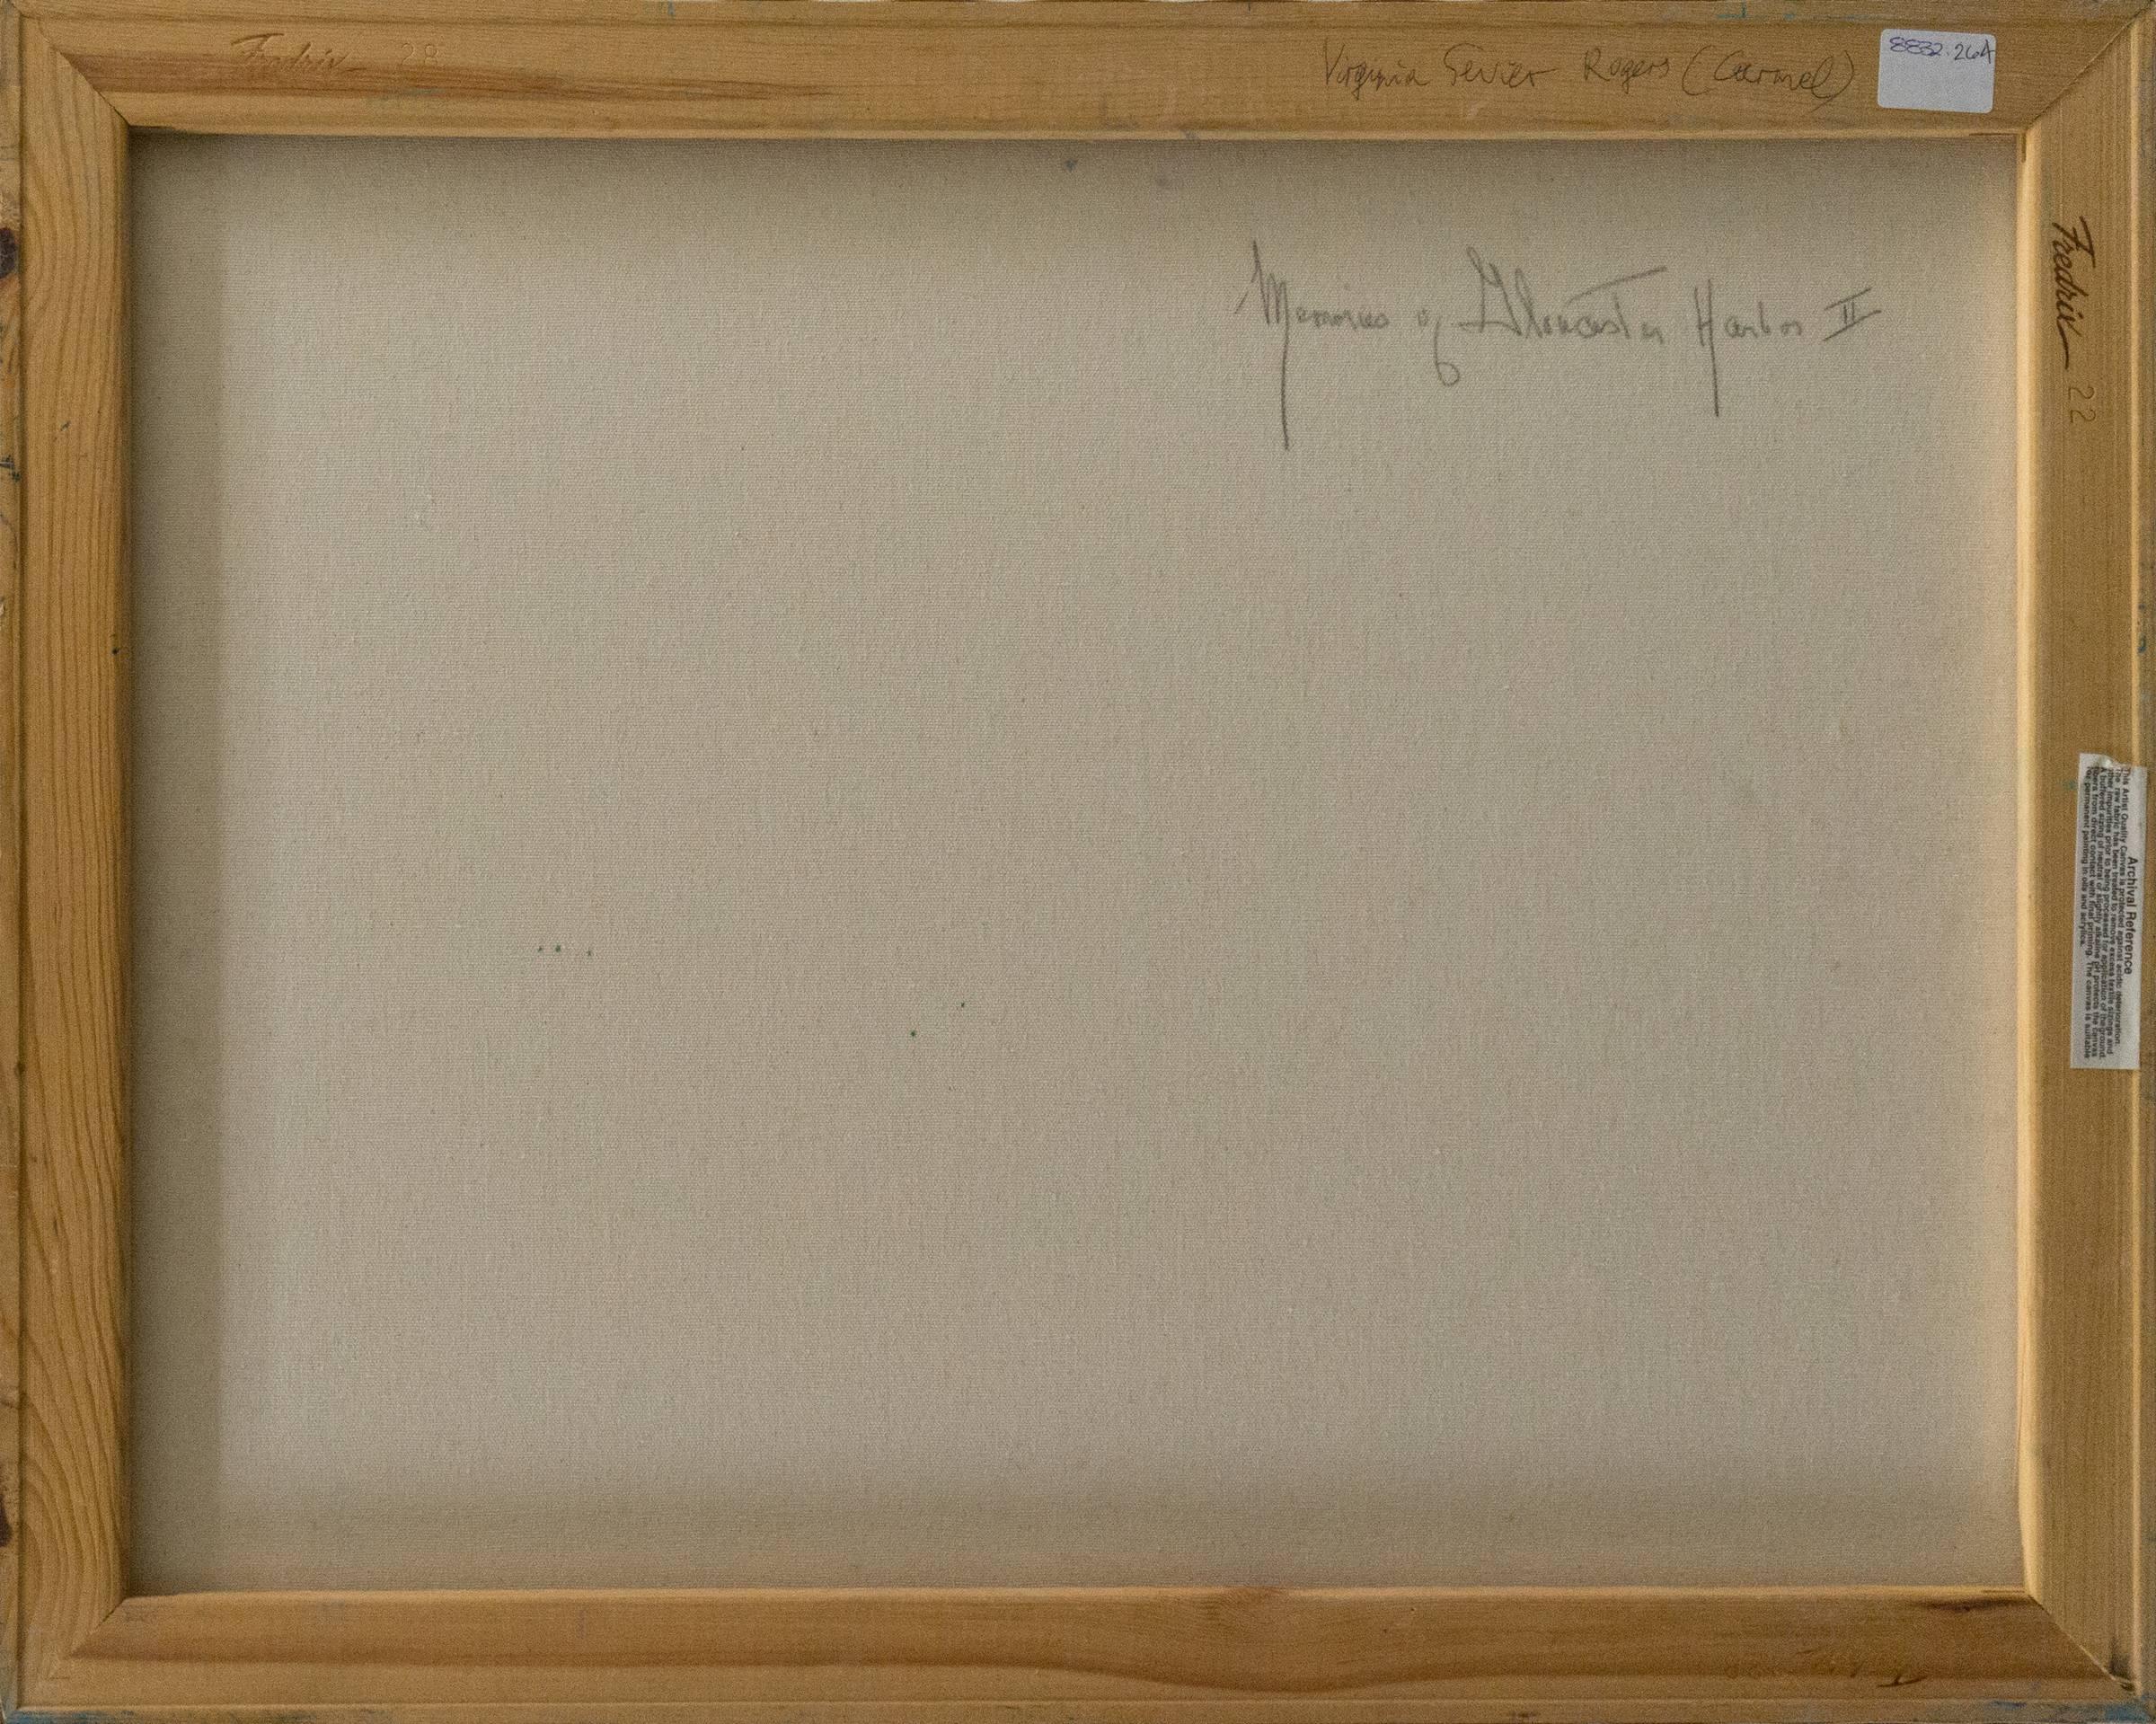 Monogrammed lower left, 'VSR' for Virginia Sevier Rogers (American, 1916-2015) and dated May 1996; additionally signed verso and titled, 'Memories of Gloucester Harbor II'

Substantial Post-Impressionist view of Gloucester Harbor in Massachusetts